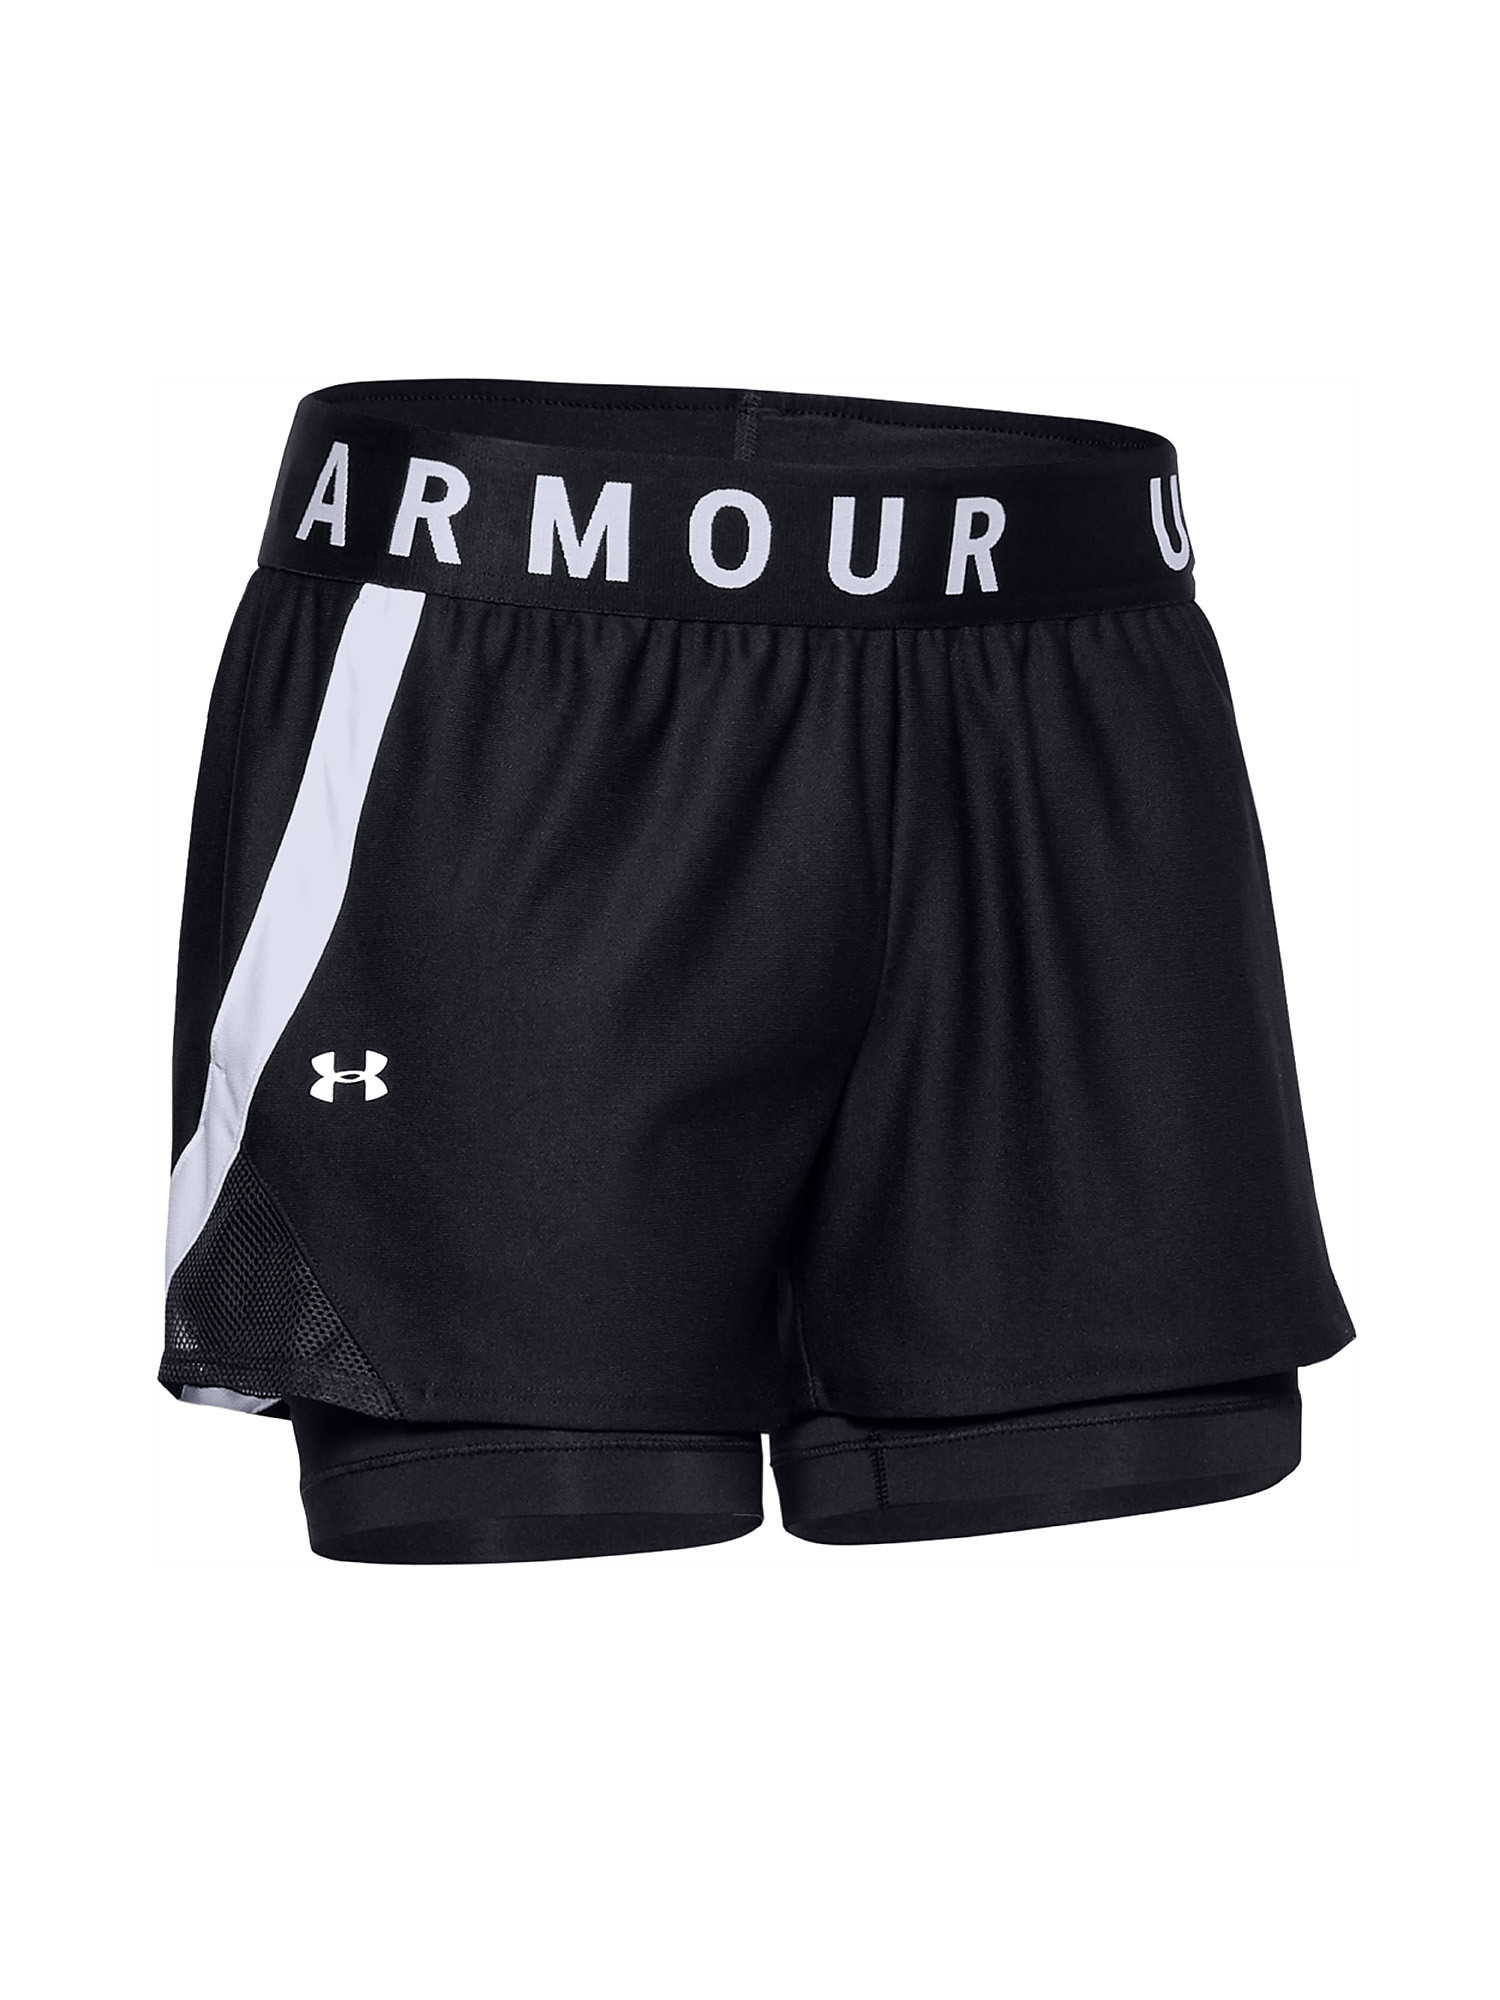 Under Armour - UA Play Up 2 in 1 Shorts, Black, large image number 0